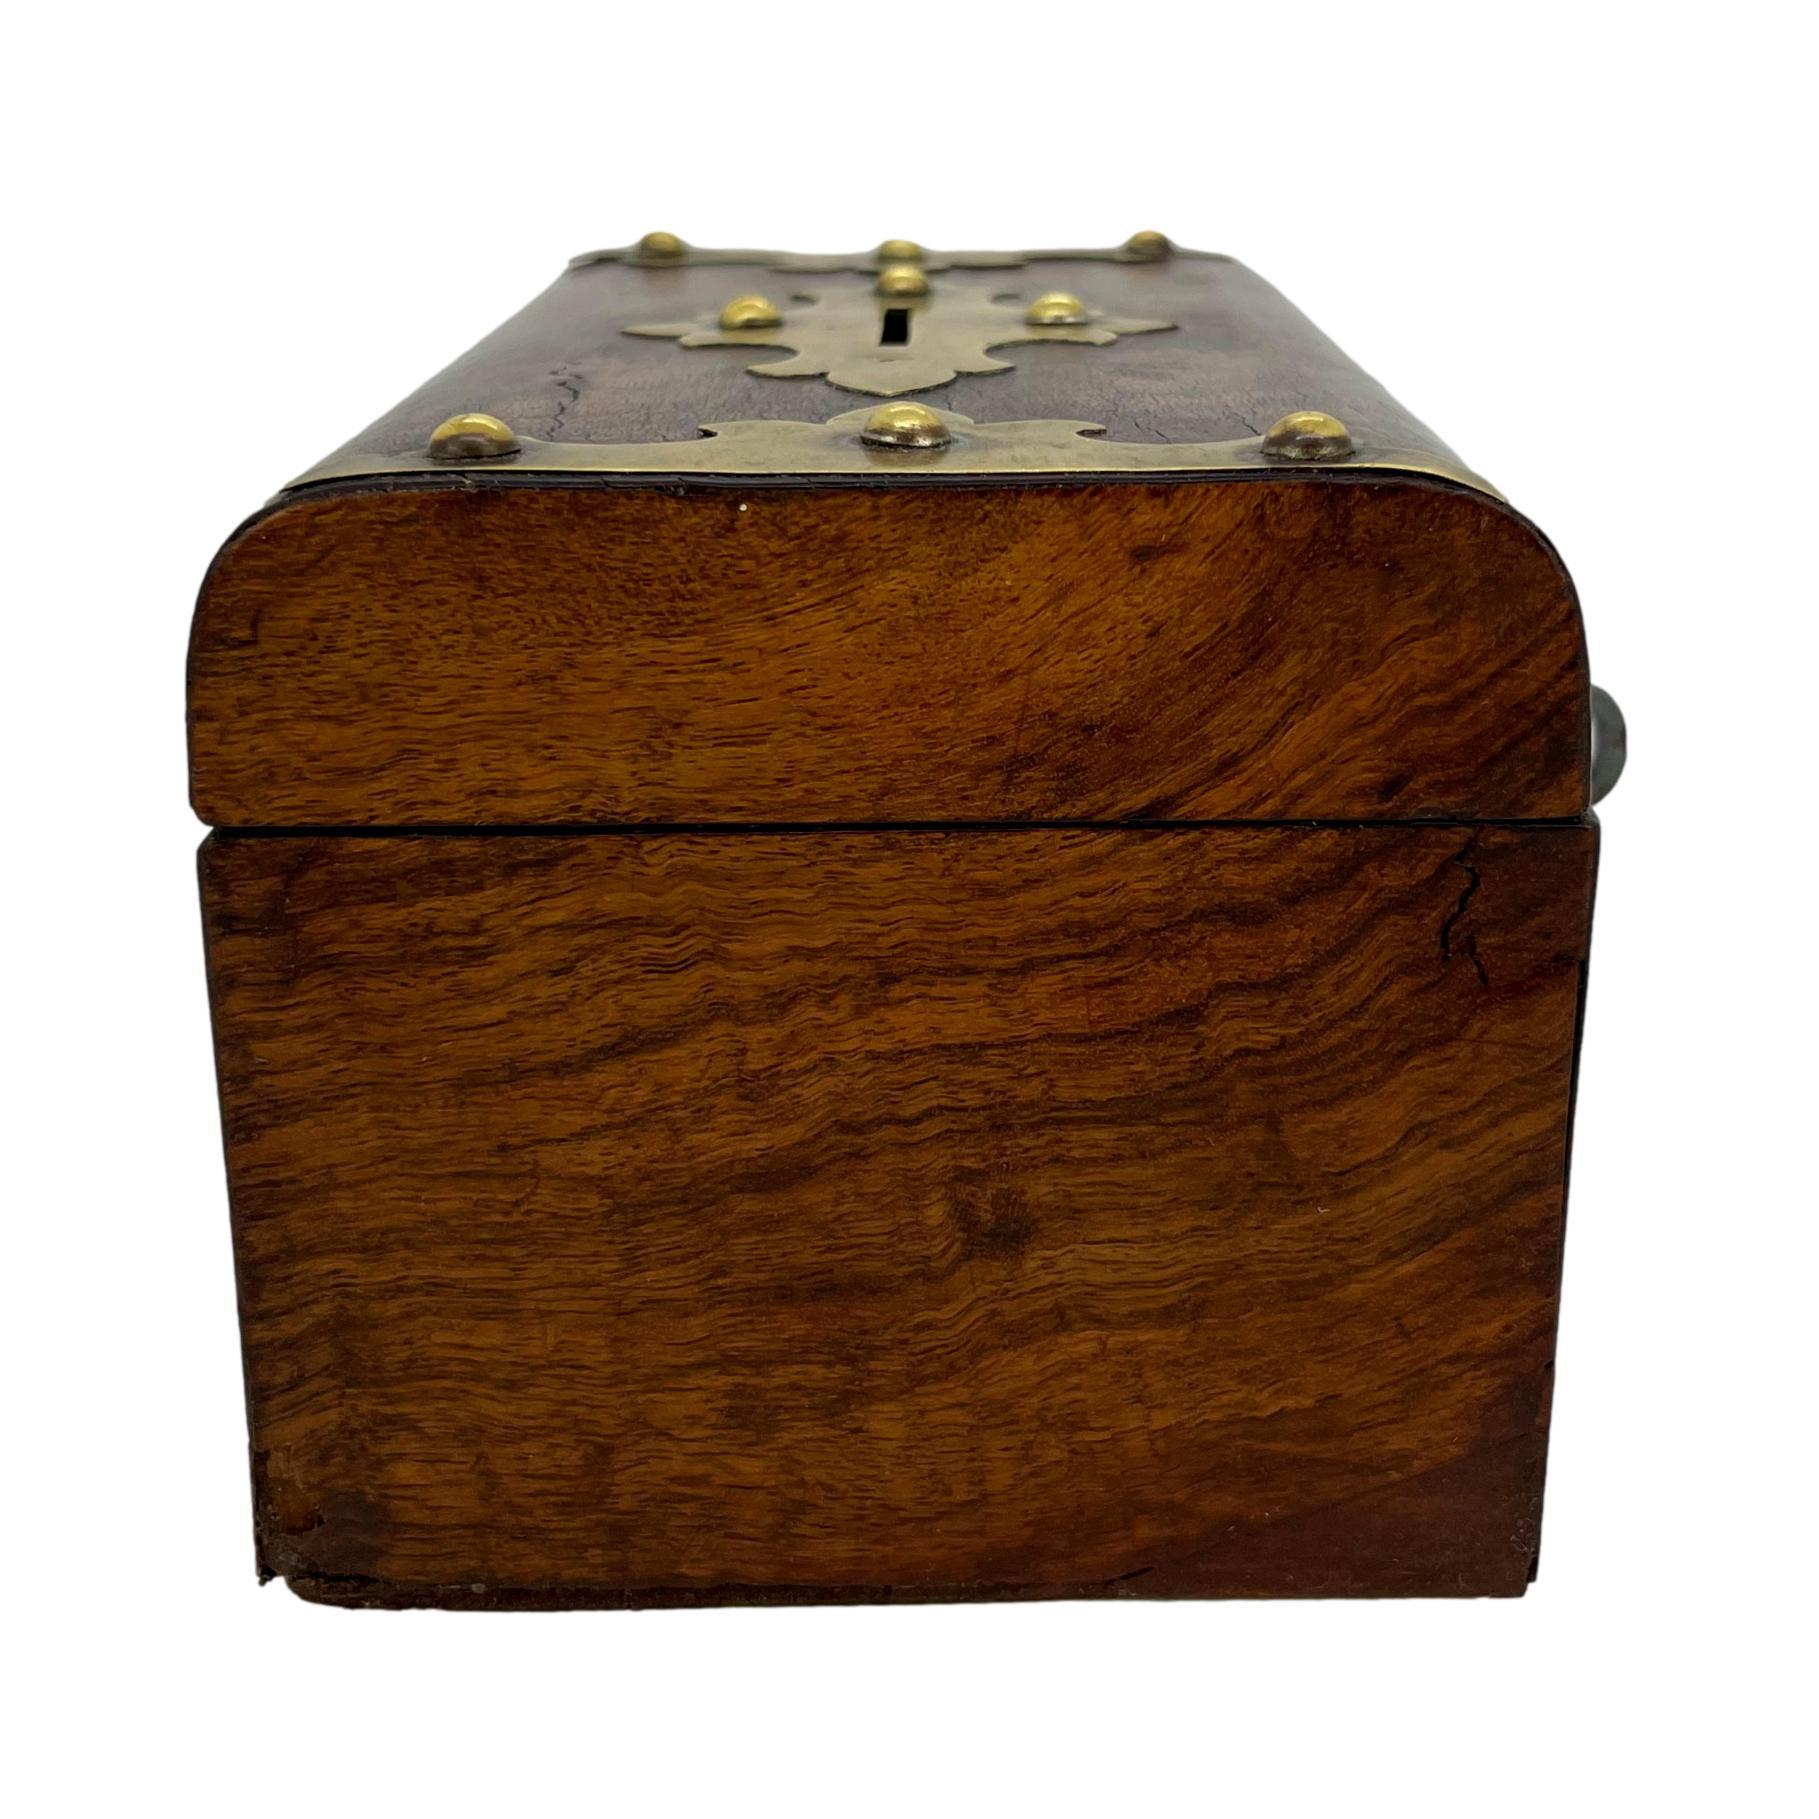 Burl Walnut and Brass Embellished Money Box, English, ca. 1860 In Good Condition For Sale In Banner Elk, NC